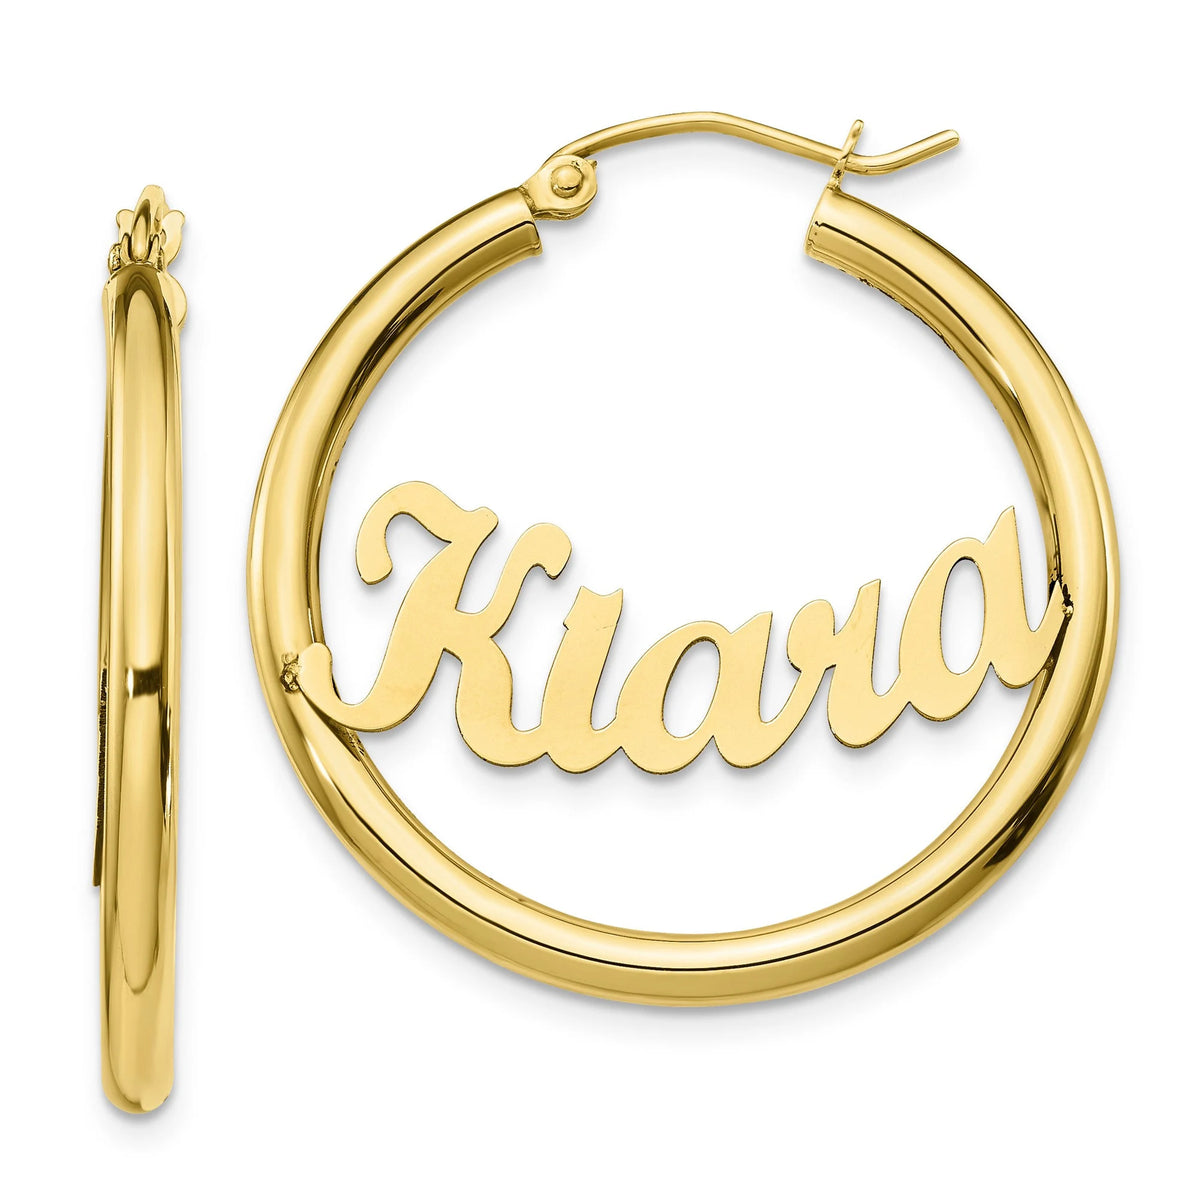 Personalized Name Hoop Earrings 14k Yellow Gold - Gift Box Included Made in USA 1.2 inches